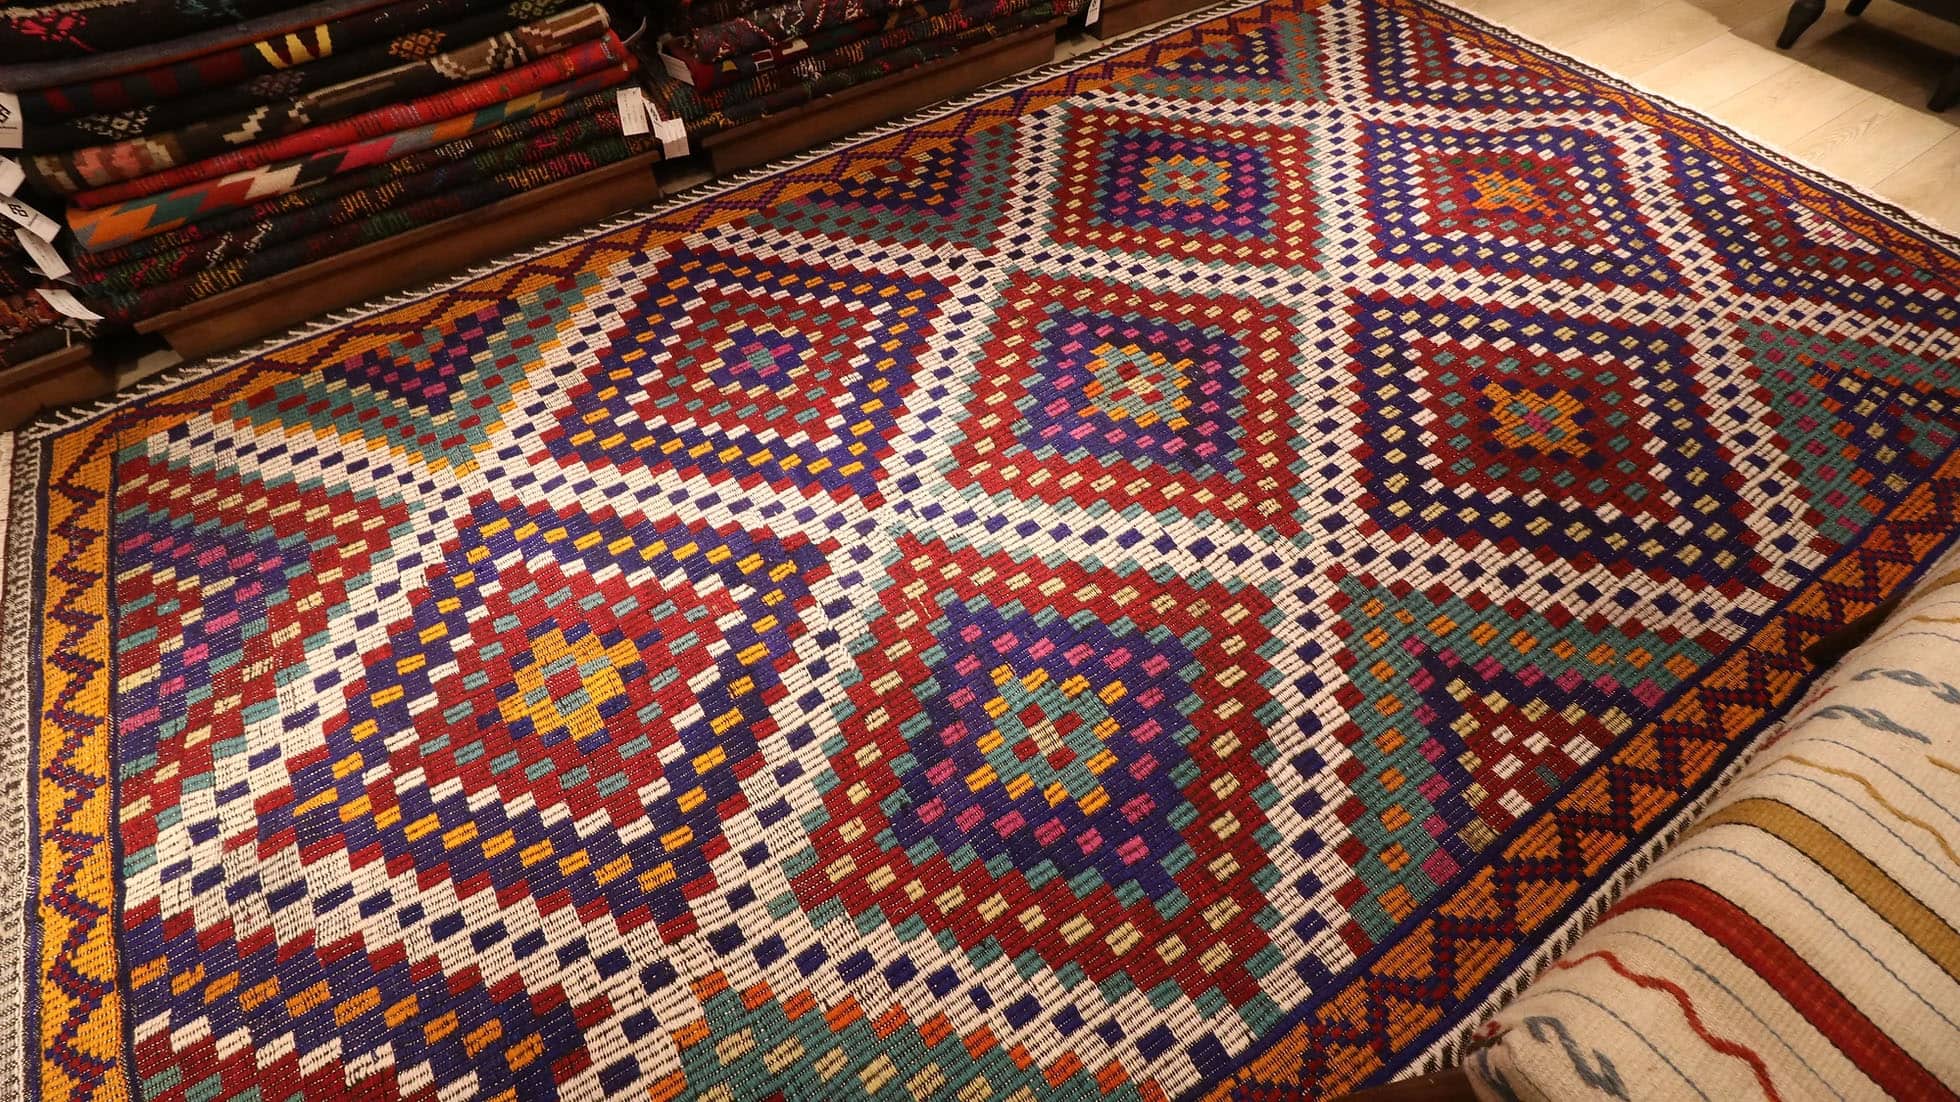 a magnificent vintage mid-century eclectic Turkish rug in many vibrant and vivid colors with traditional kilim motifs